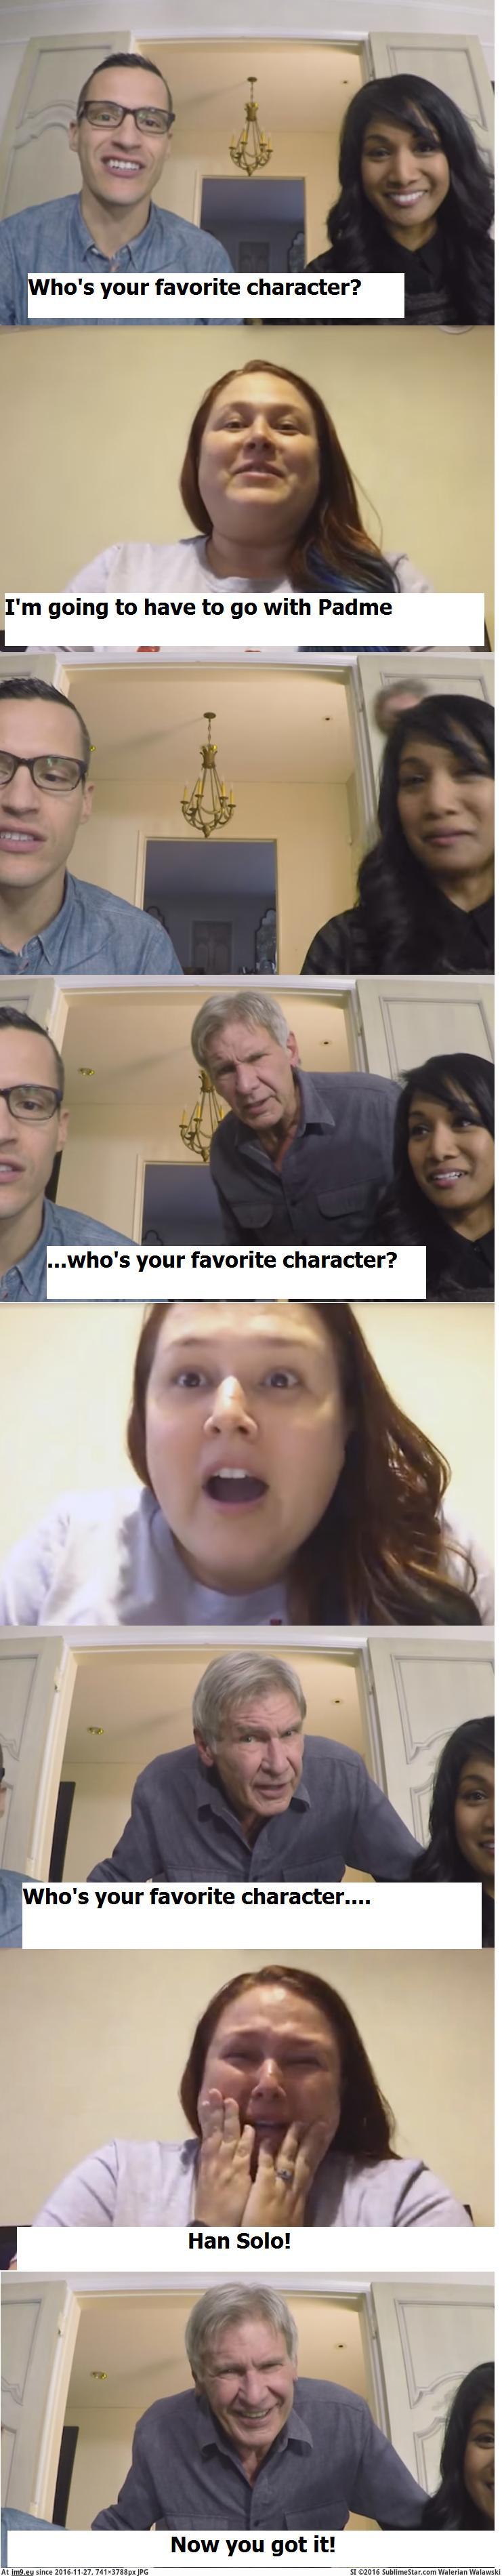 [Funny] Who's your favorite Star Wars character? (in My r/FUNNY favs)